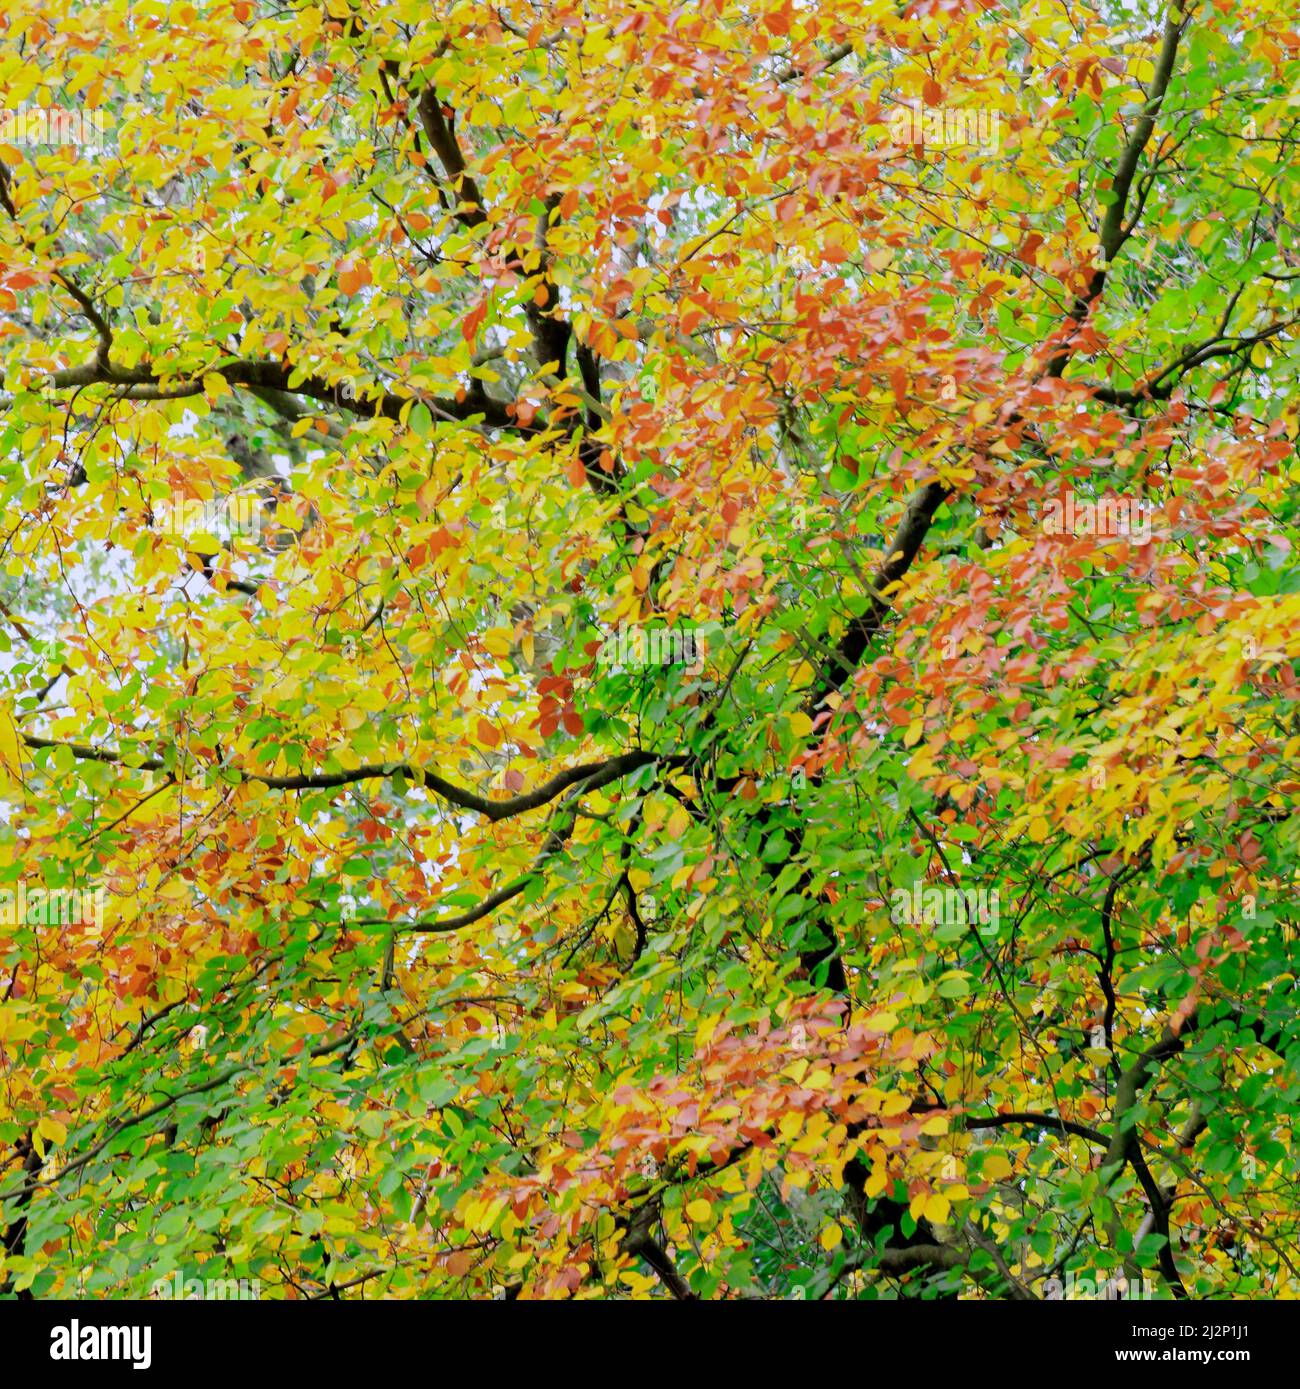 Beech tree canopy with beautiful leaves of copper bronze, yellow and gold in Autumn deciduous woodland on Cannock Chase Stock Photo